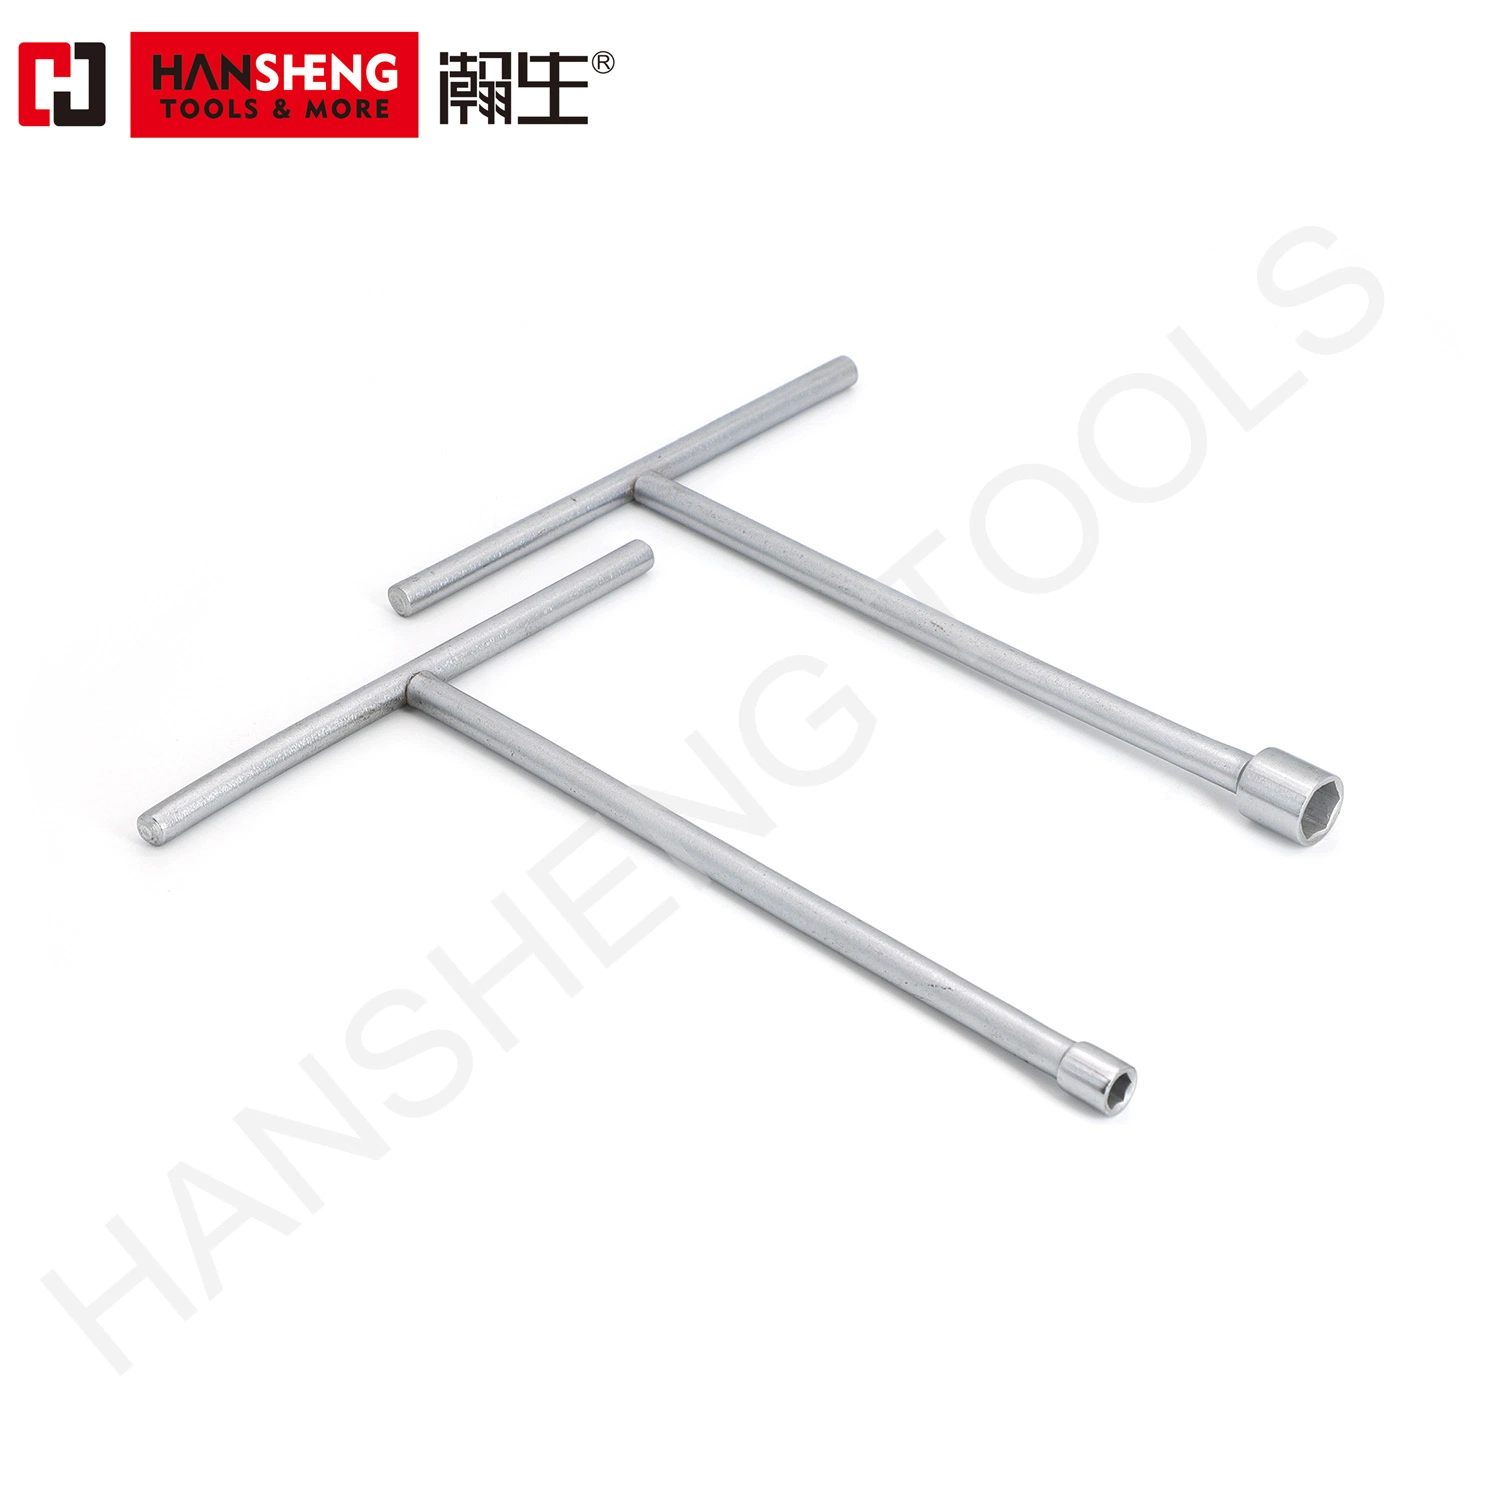 Made of Carbon Steel or Cr-V, Chrome Plated, Pearl-Nickel Plated, Wrench, Cross Rim Wrench, T-Socket Wrench,G Type Clip,Cross Screw Spanner,Dual Hexagon Socket